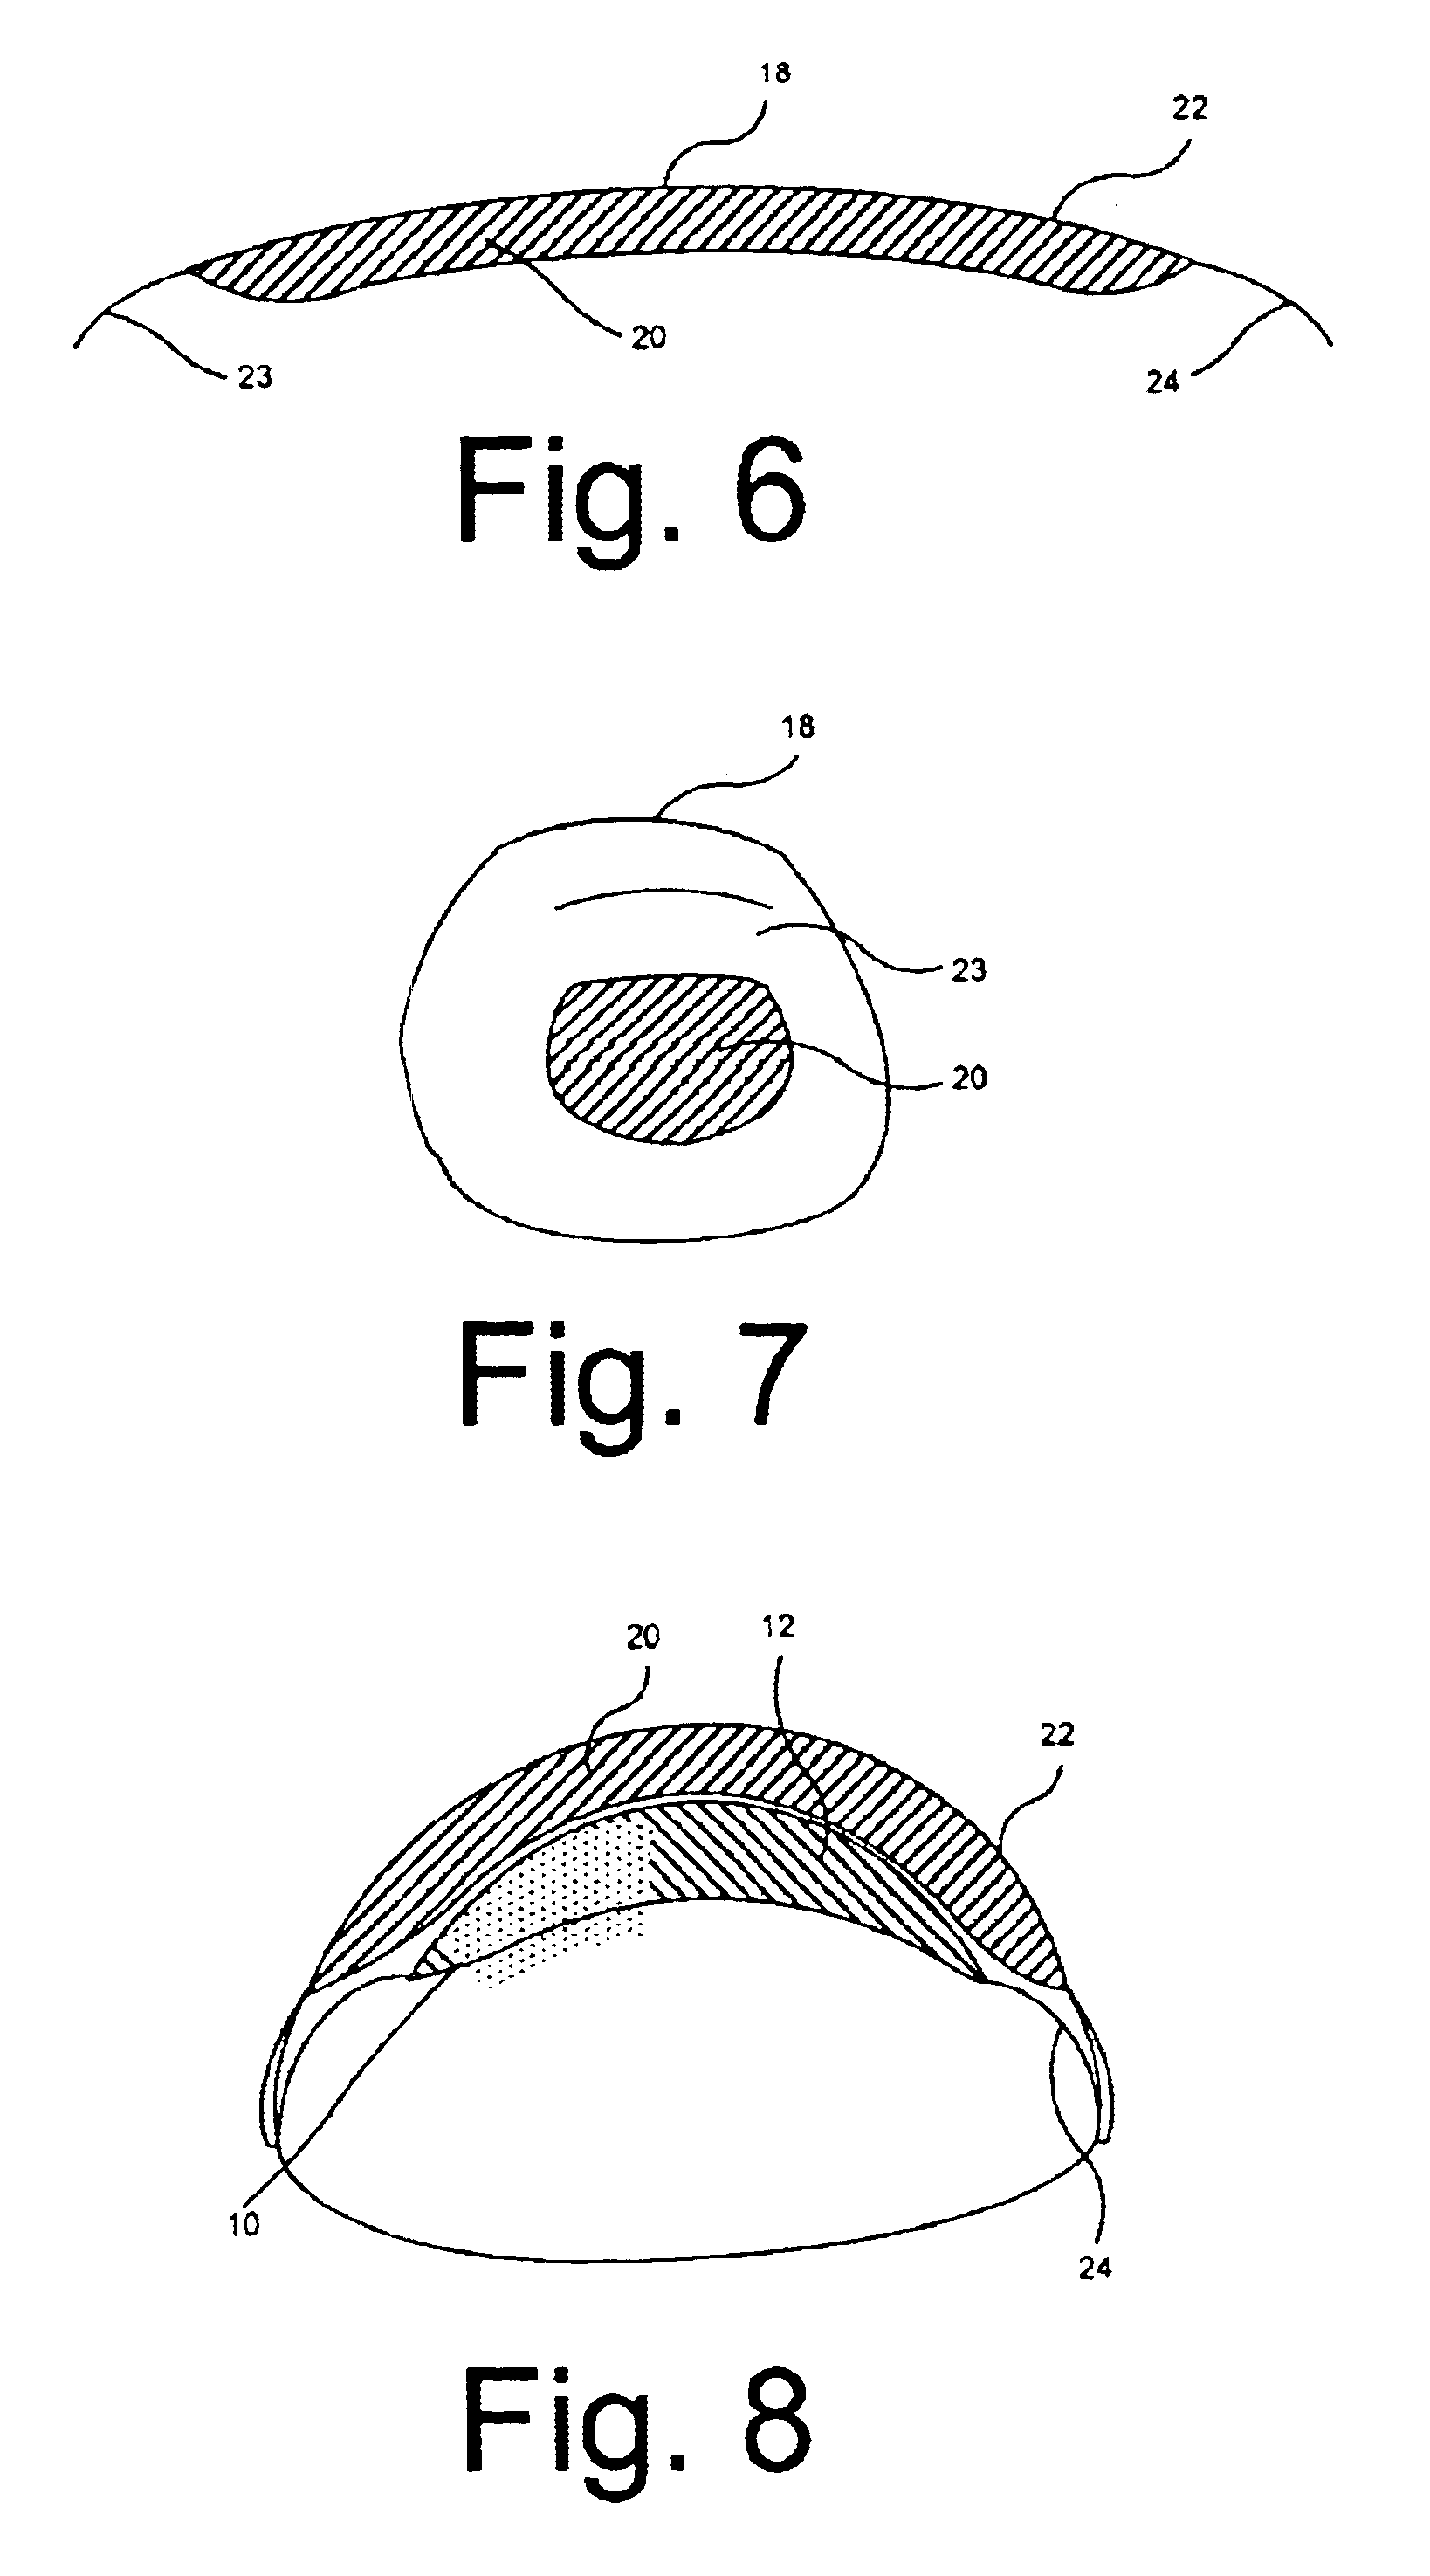 Treatment modality and method for fungal nail infection